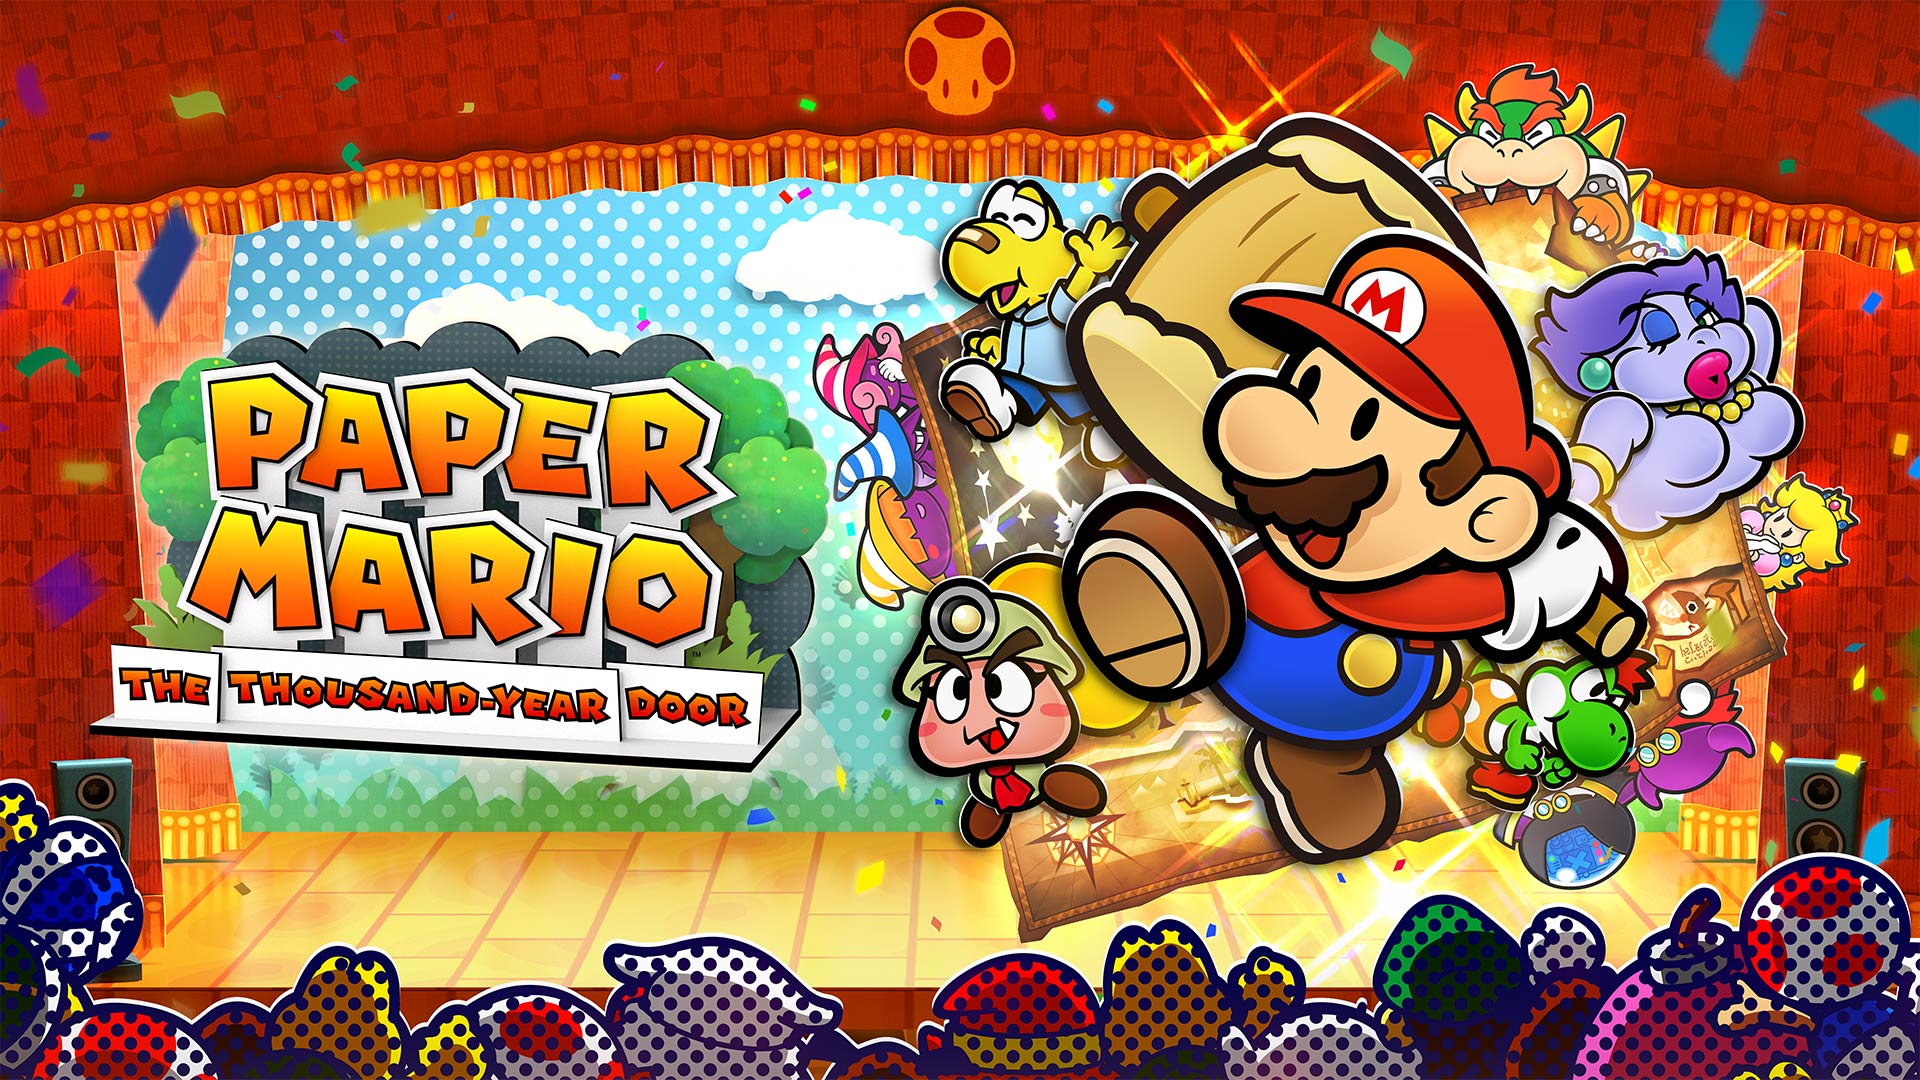 Paper Mario The ThousandYear Door for Switch launches May 23 Gematsu